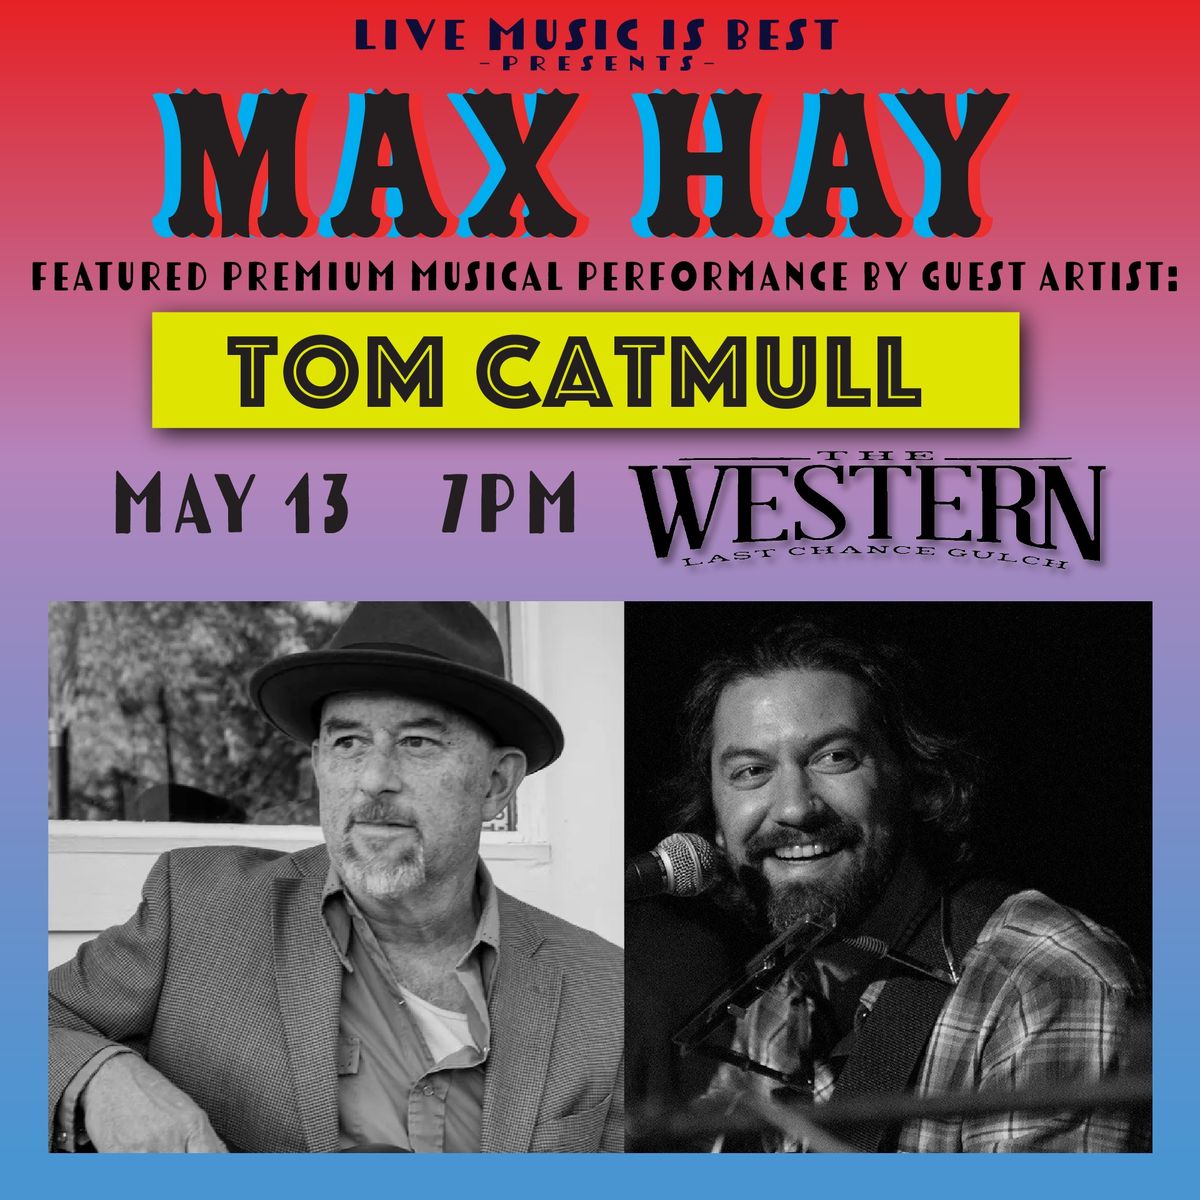 Max Hay and Tom Catmull at The Western!